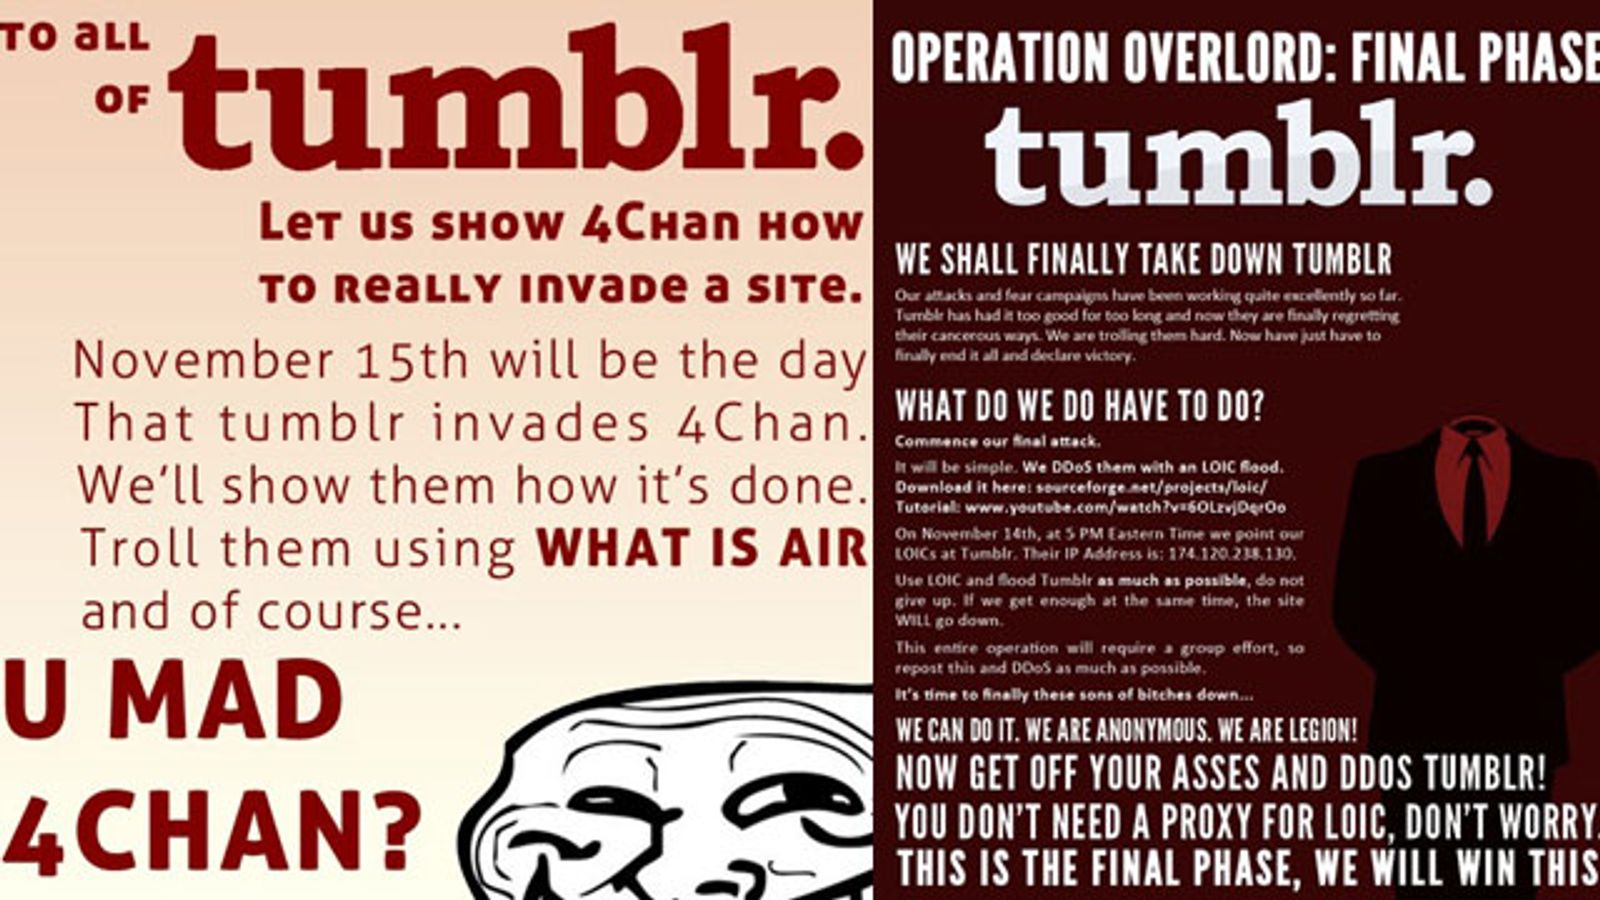 4Chan v. Tumblr: DDoS Tit for Cat or How I Spent my Lunch Money?